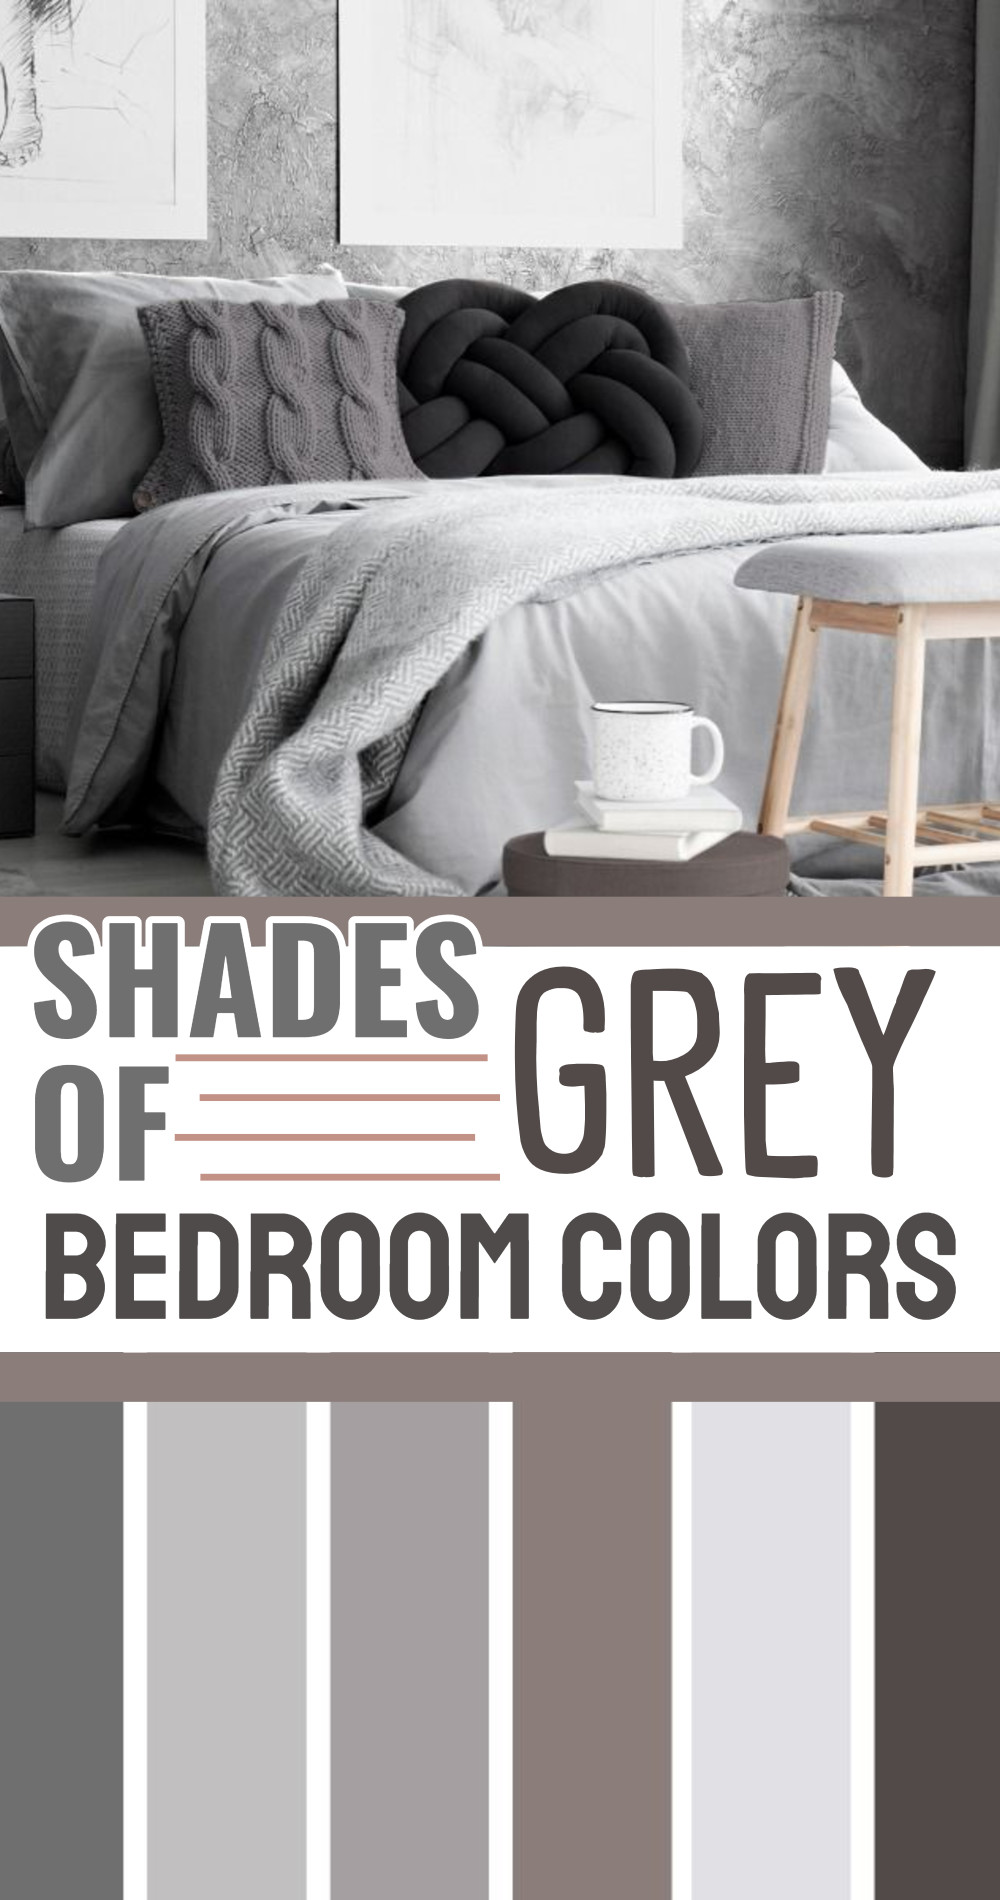 Best shades of grey bedroom colors